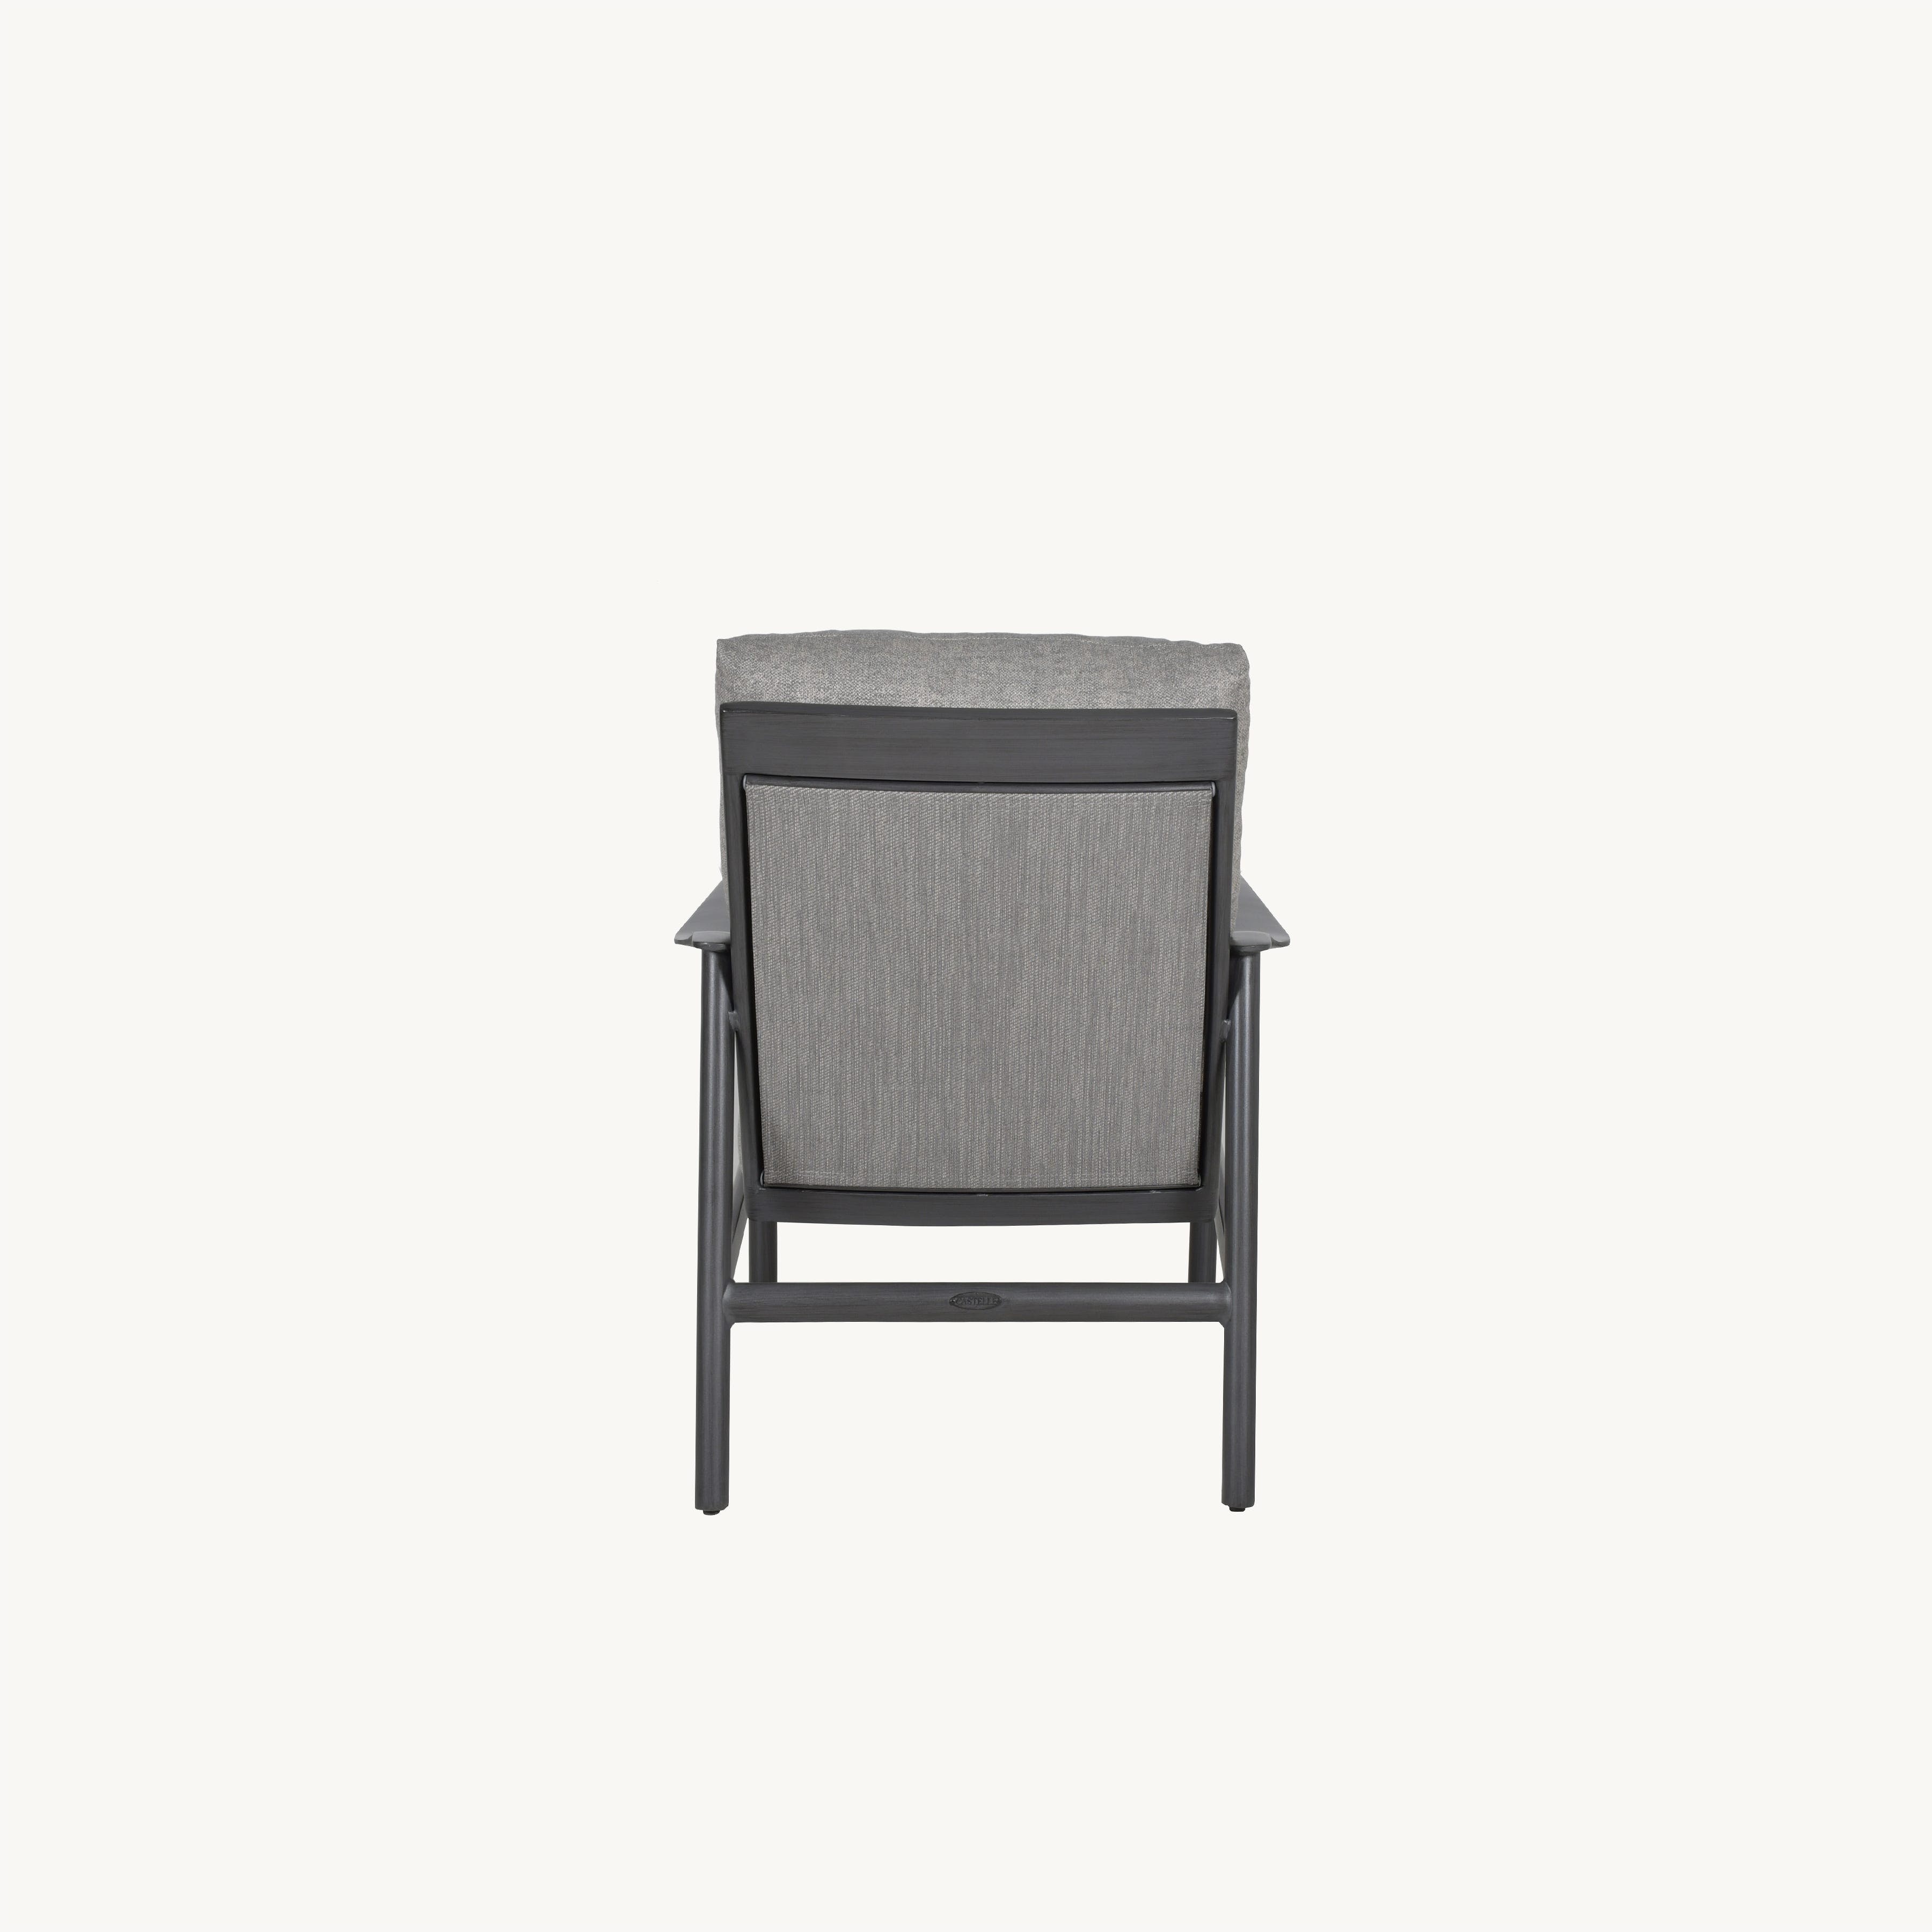 Barbados Cushion Dining Chair By Castelle